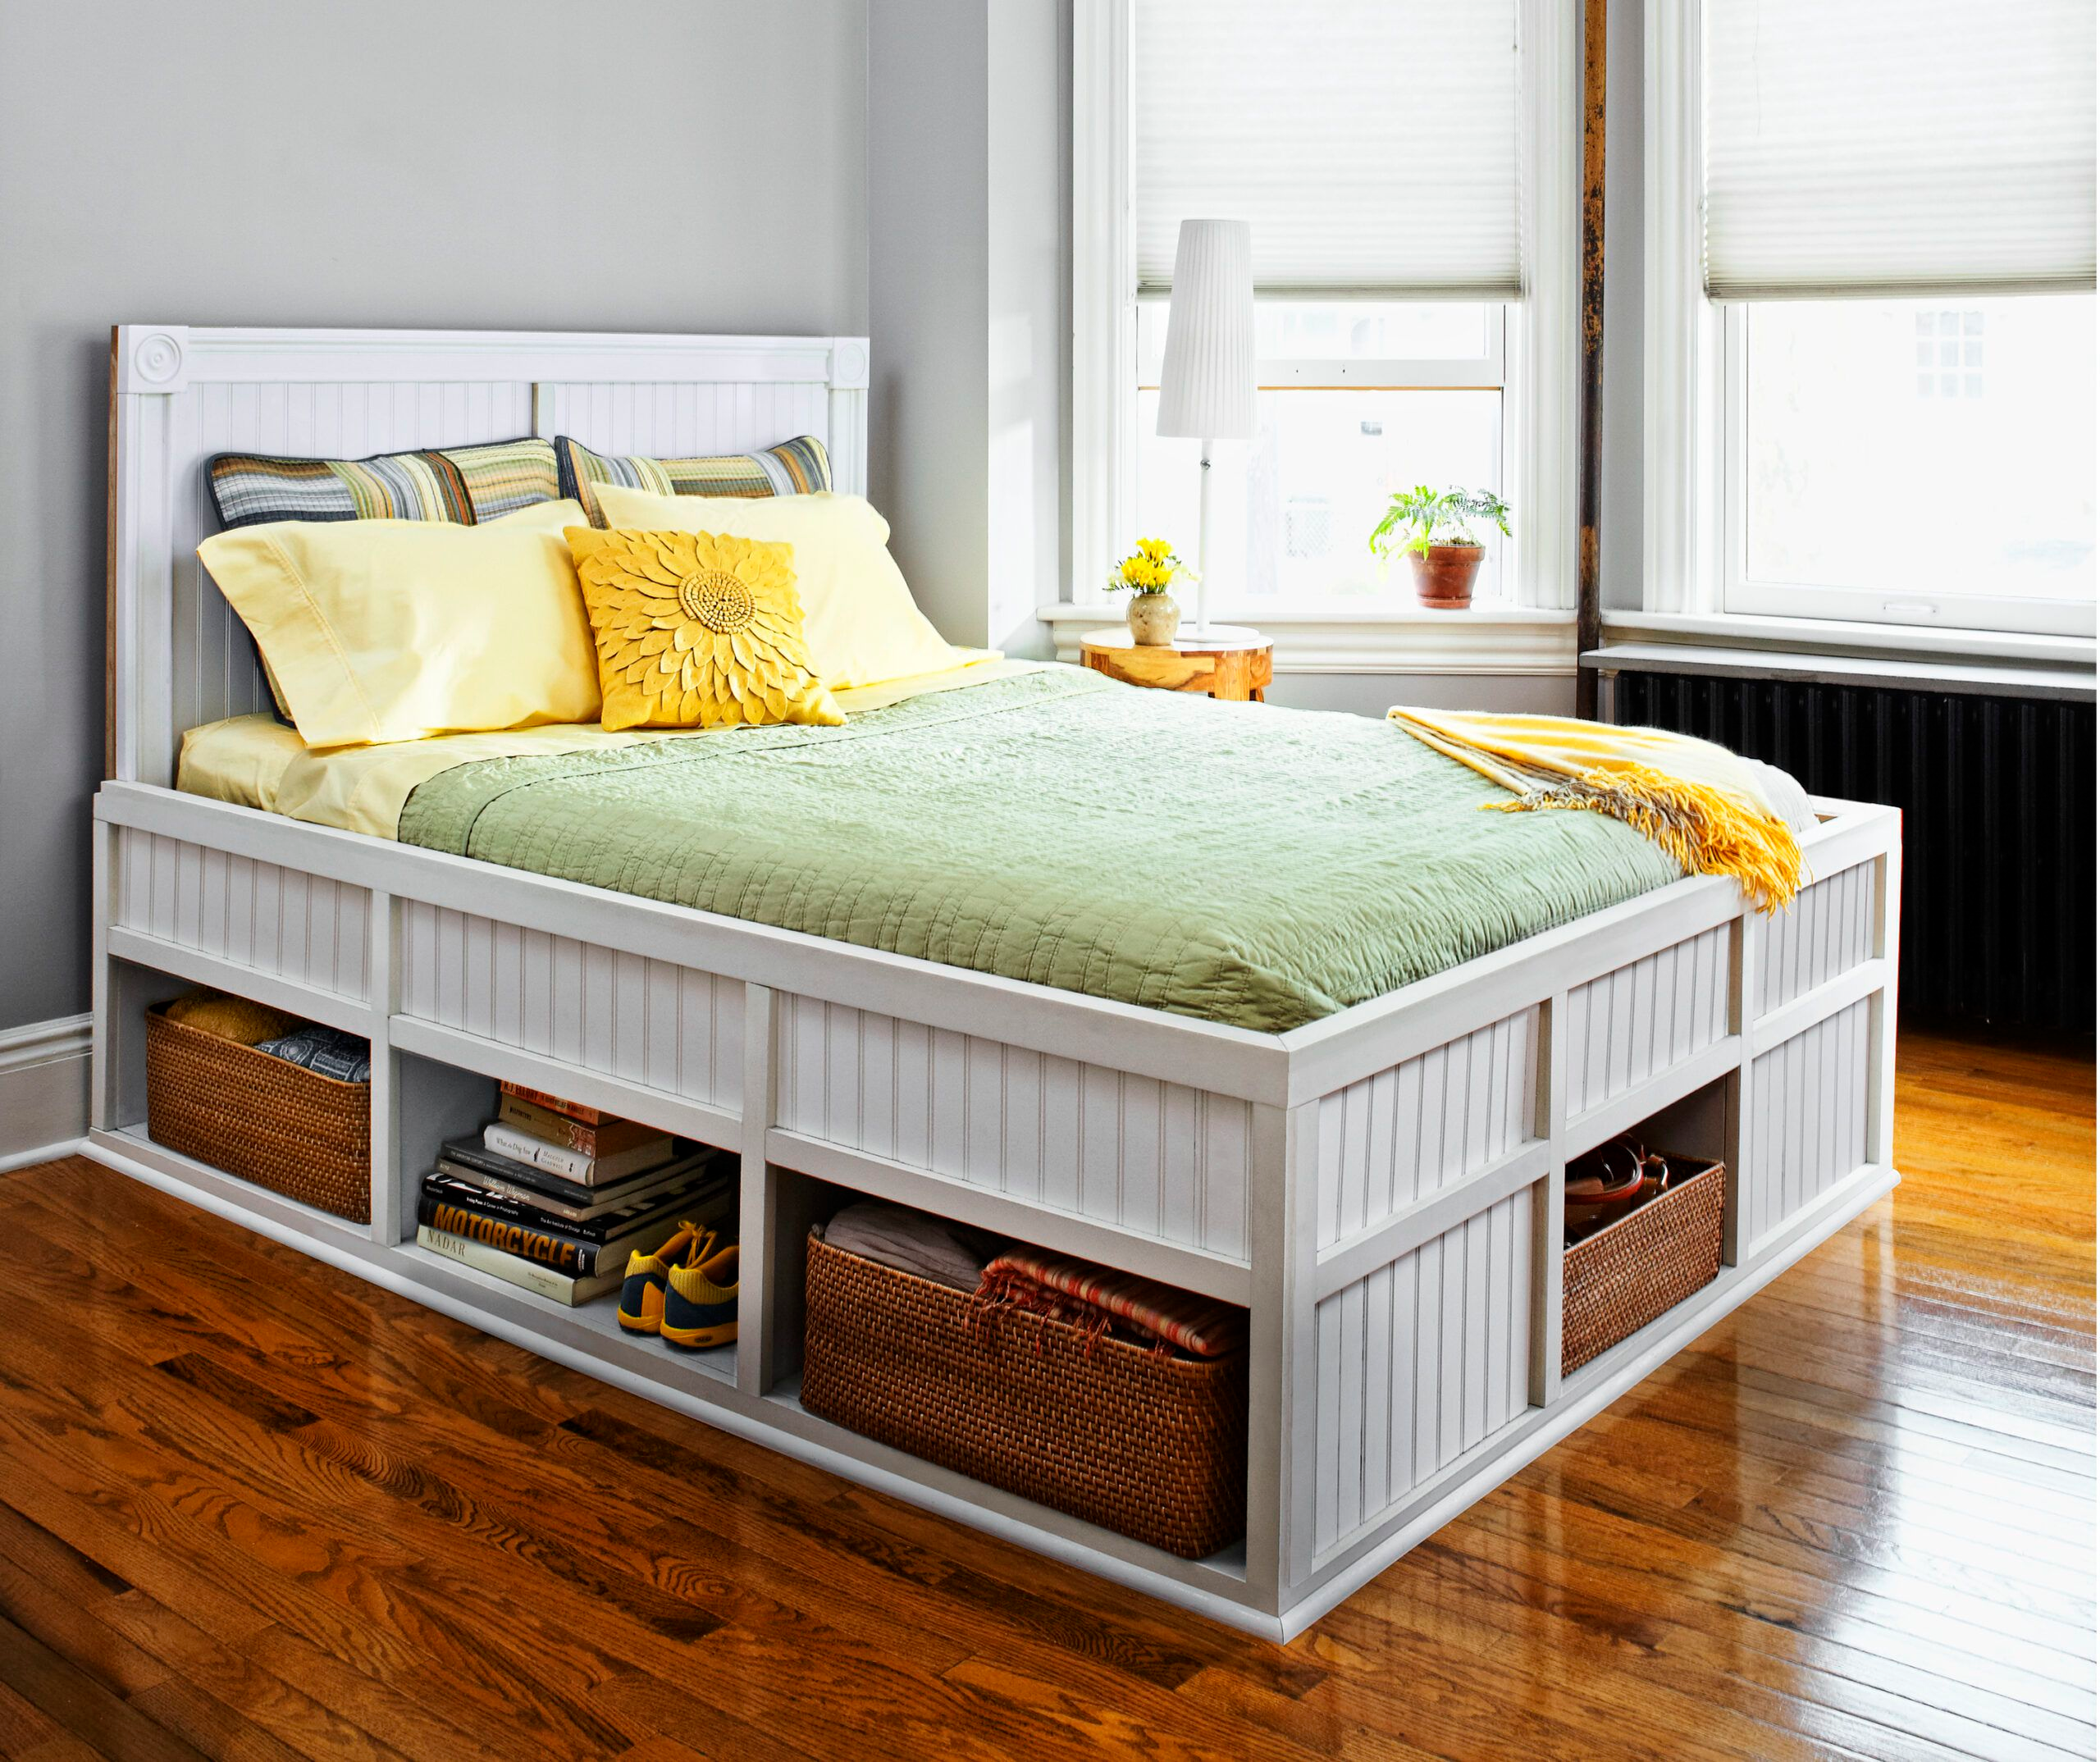 Step-by-Step-Guide-to-Raise-a-Bed-for-Storage